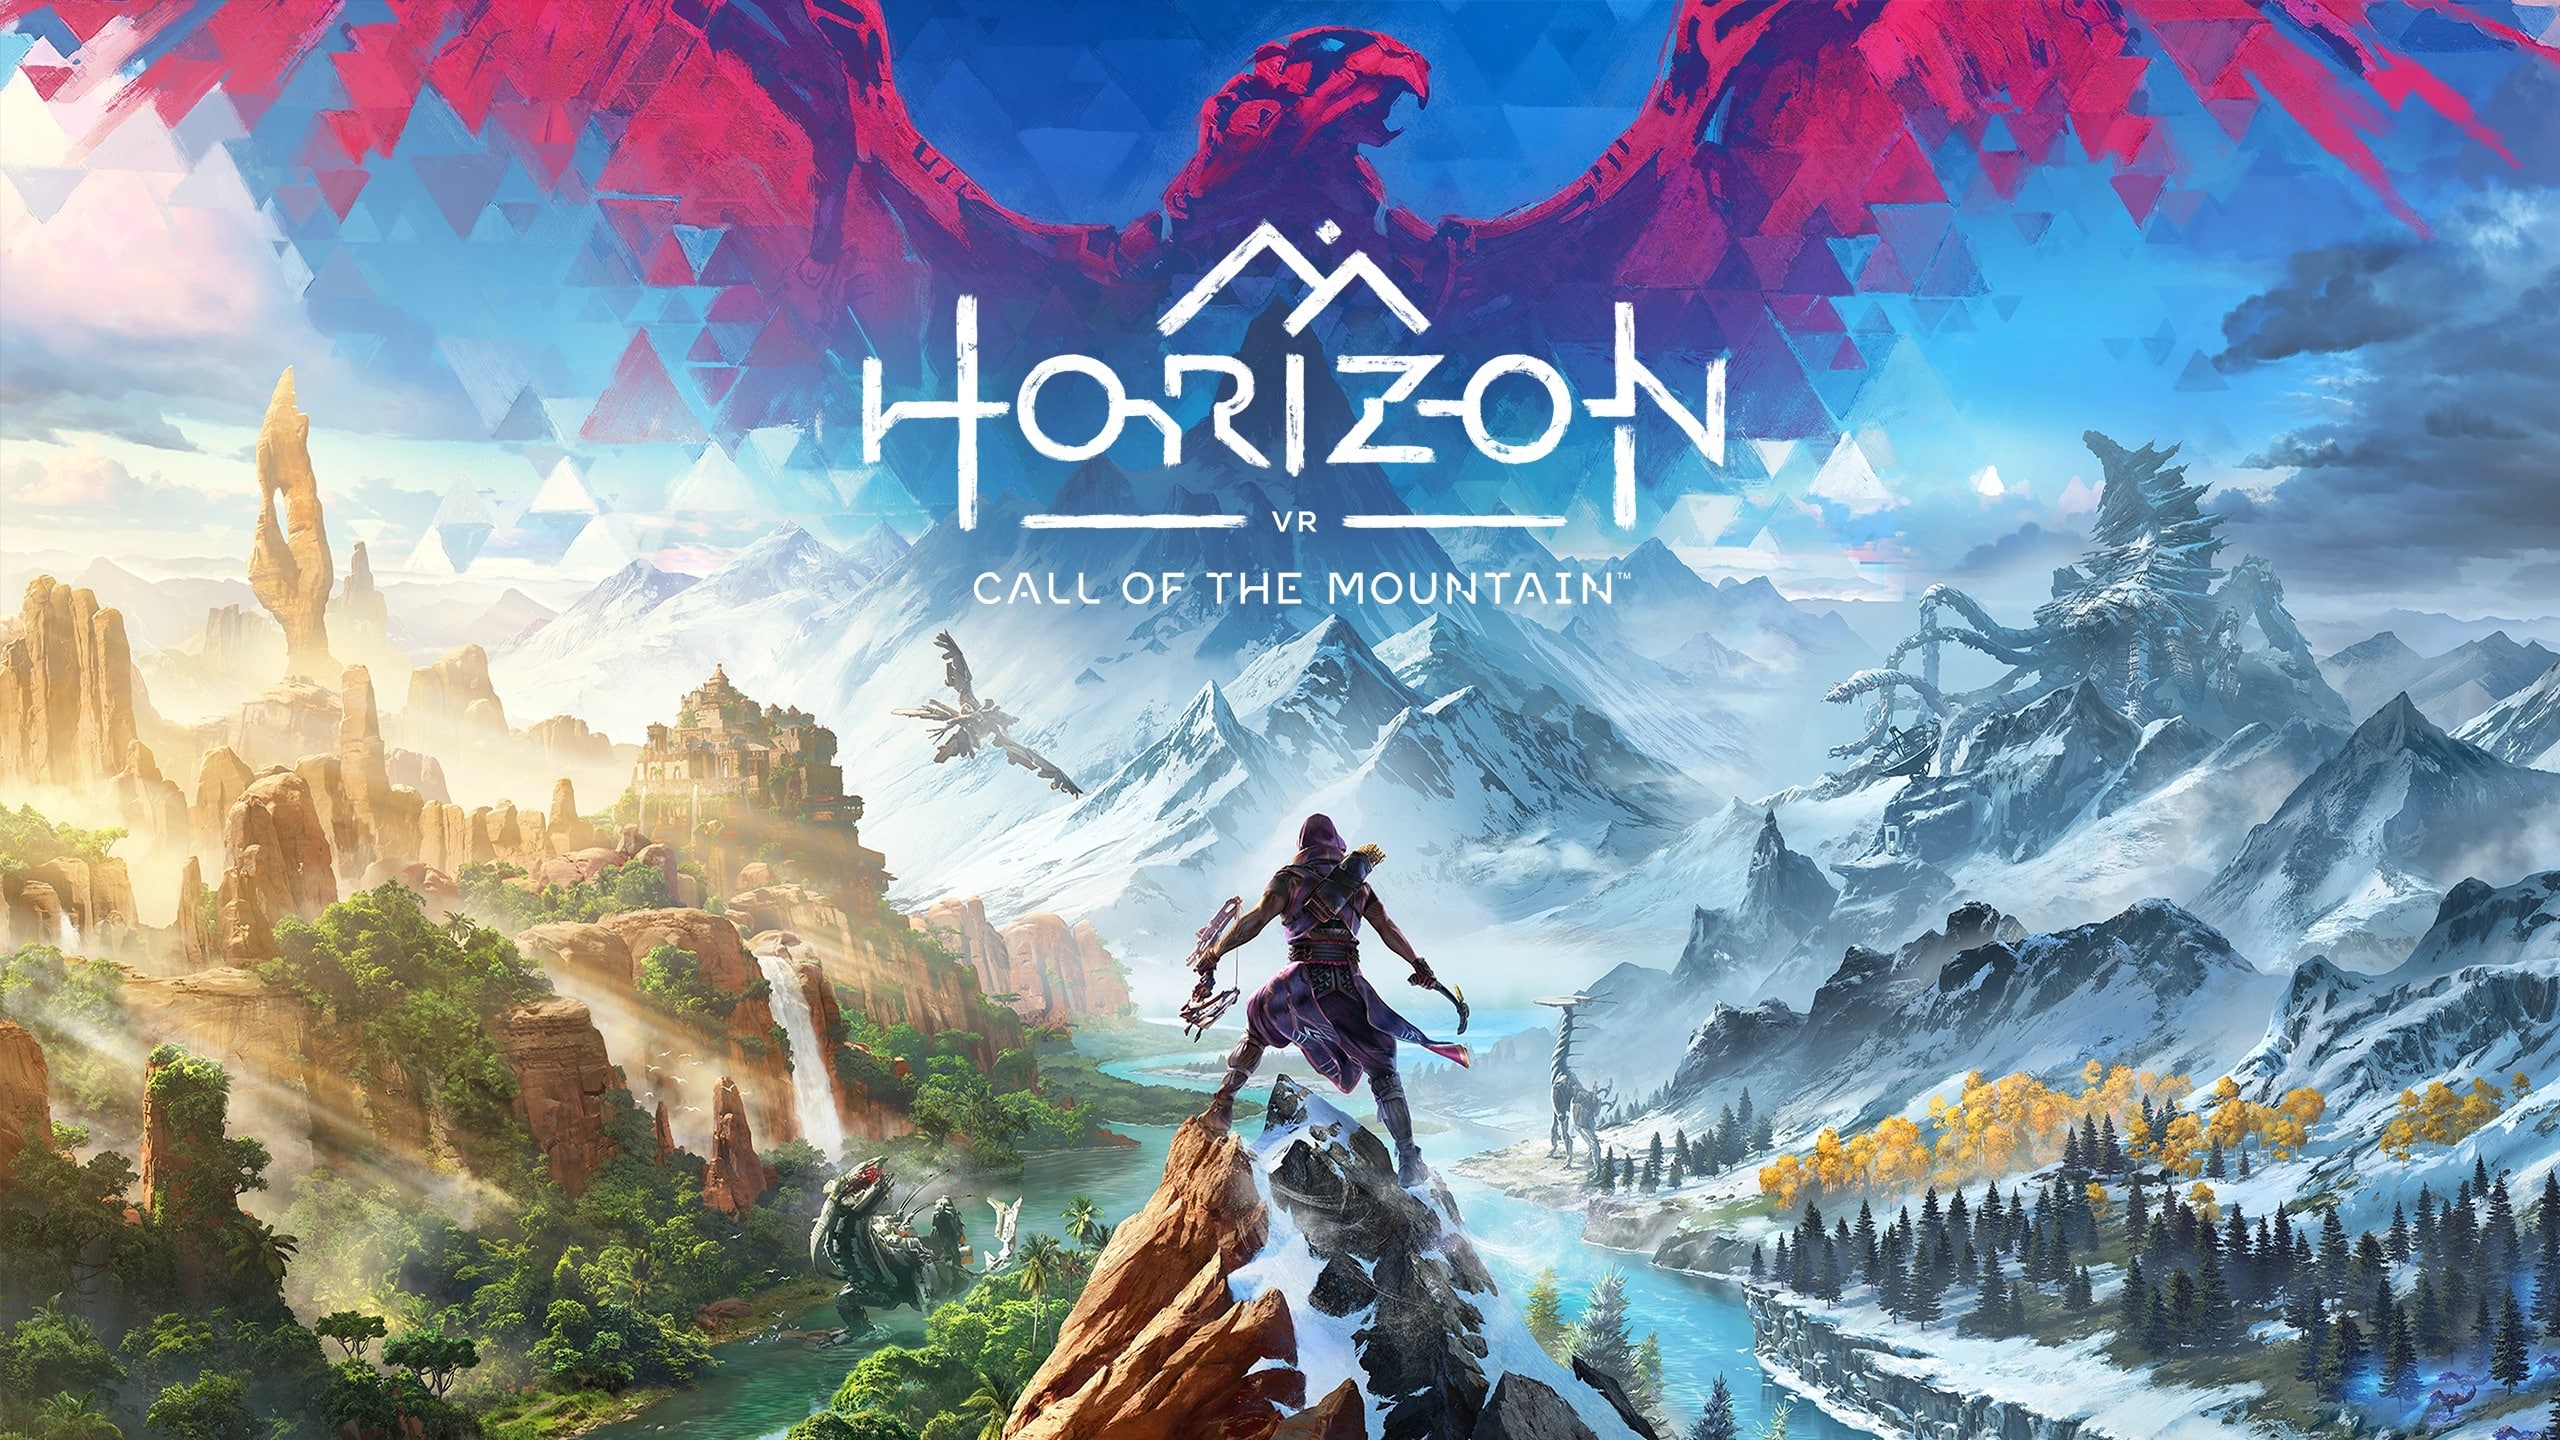 Horizon Call of the Mountain will have as its protagonist a former Carja who seeks to restore his honor